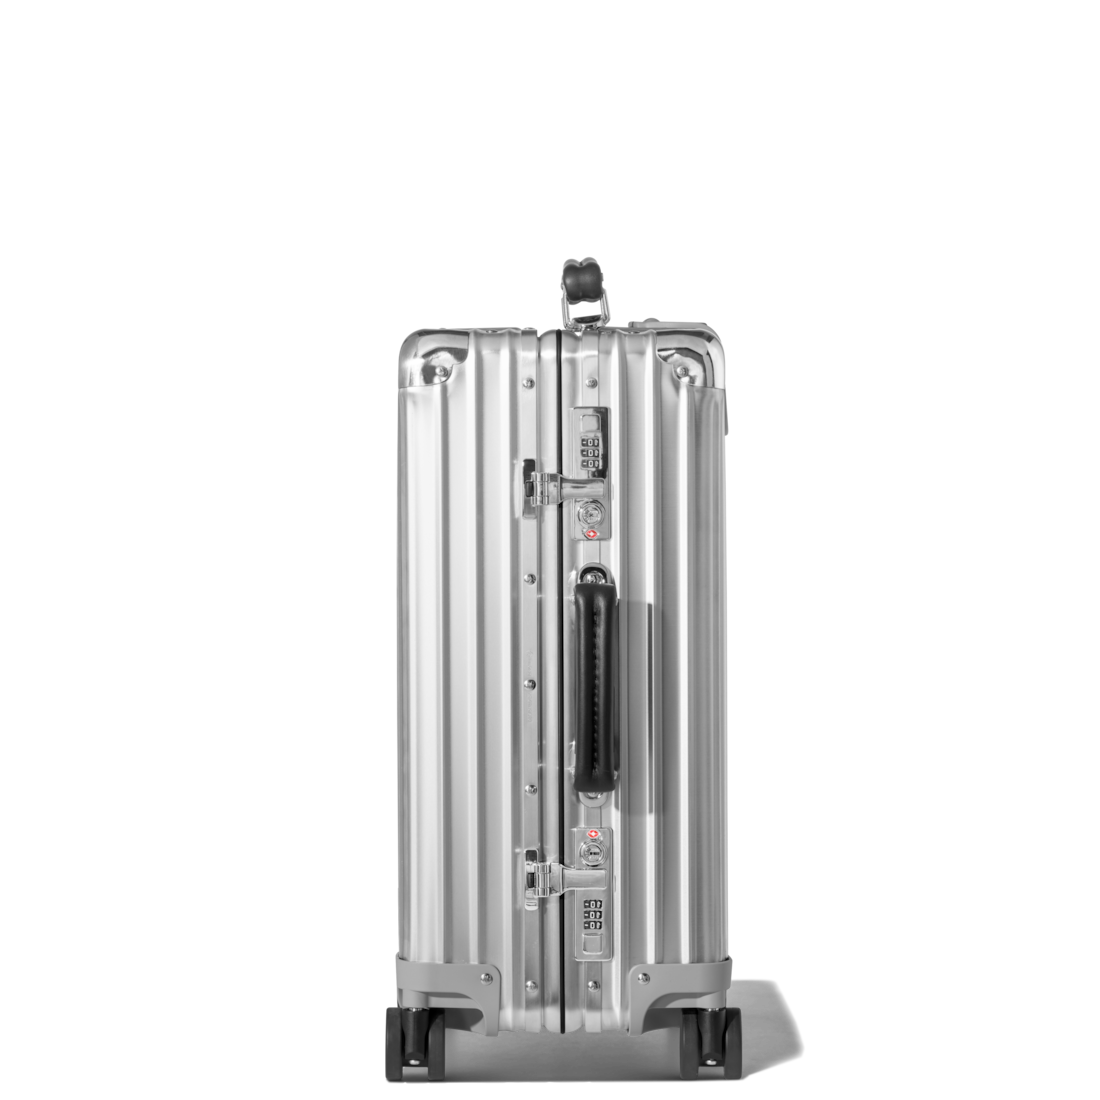 rimowa carry on classic